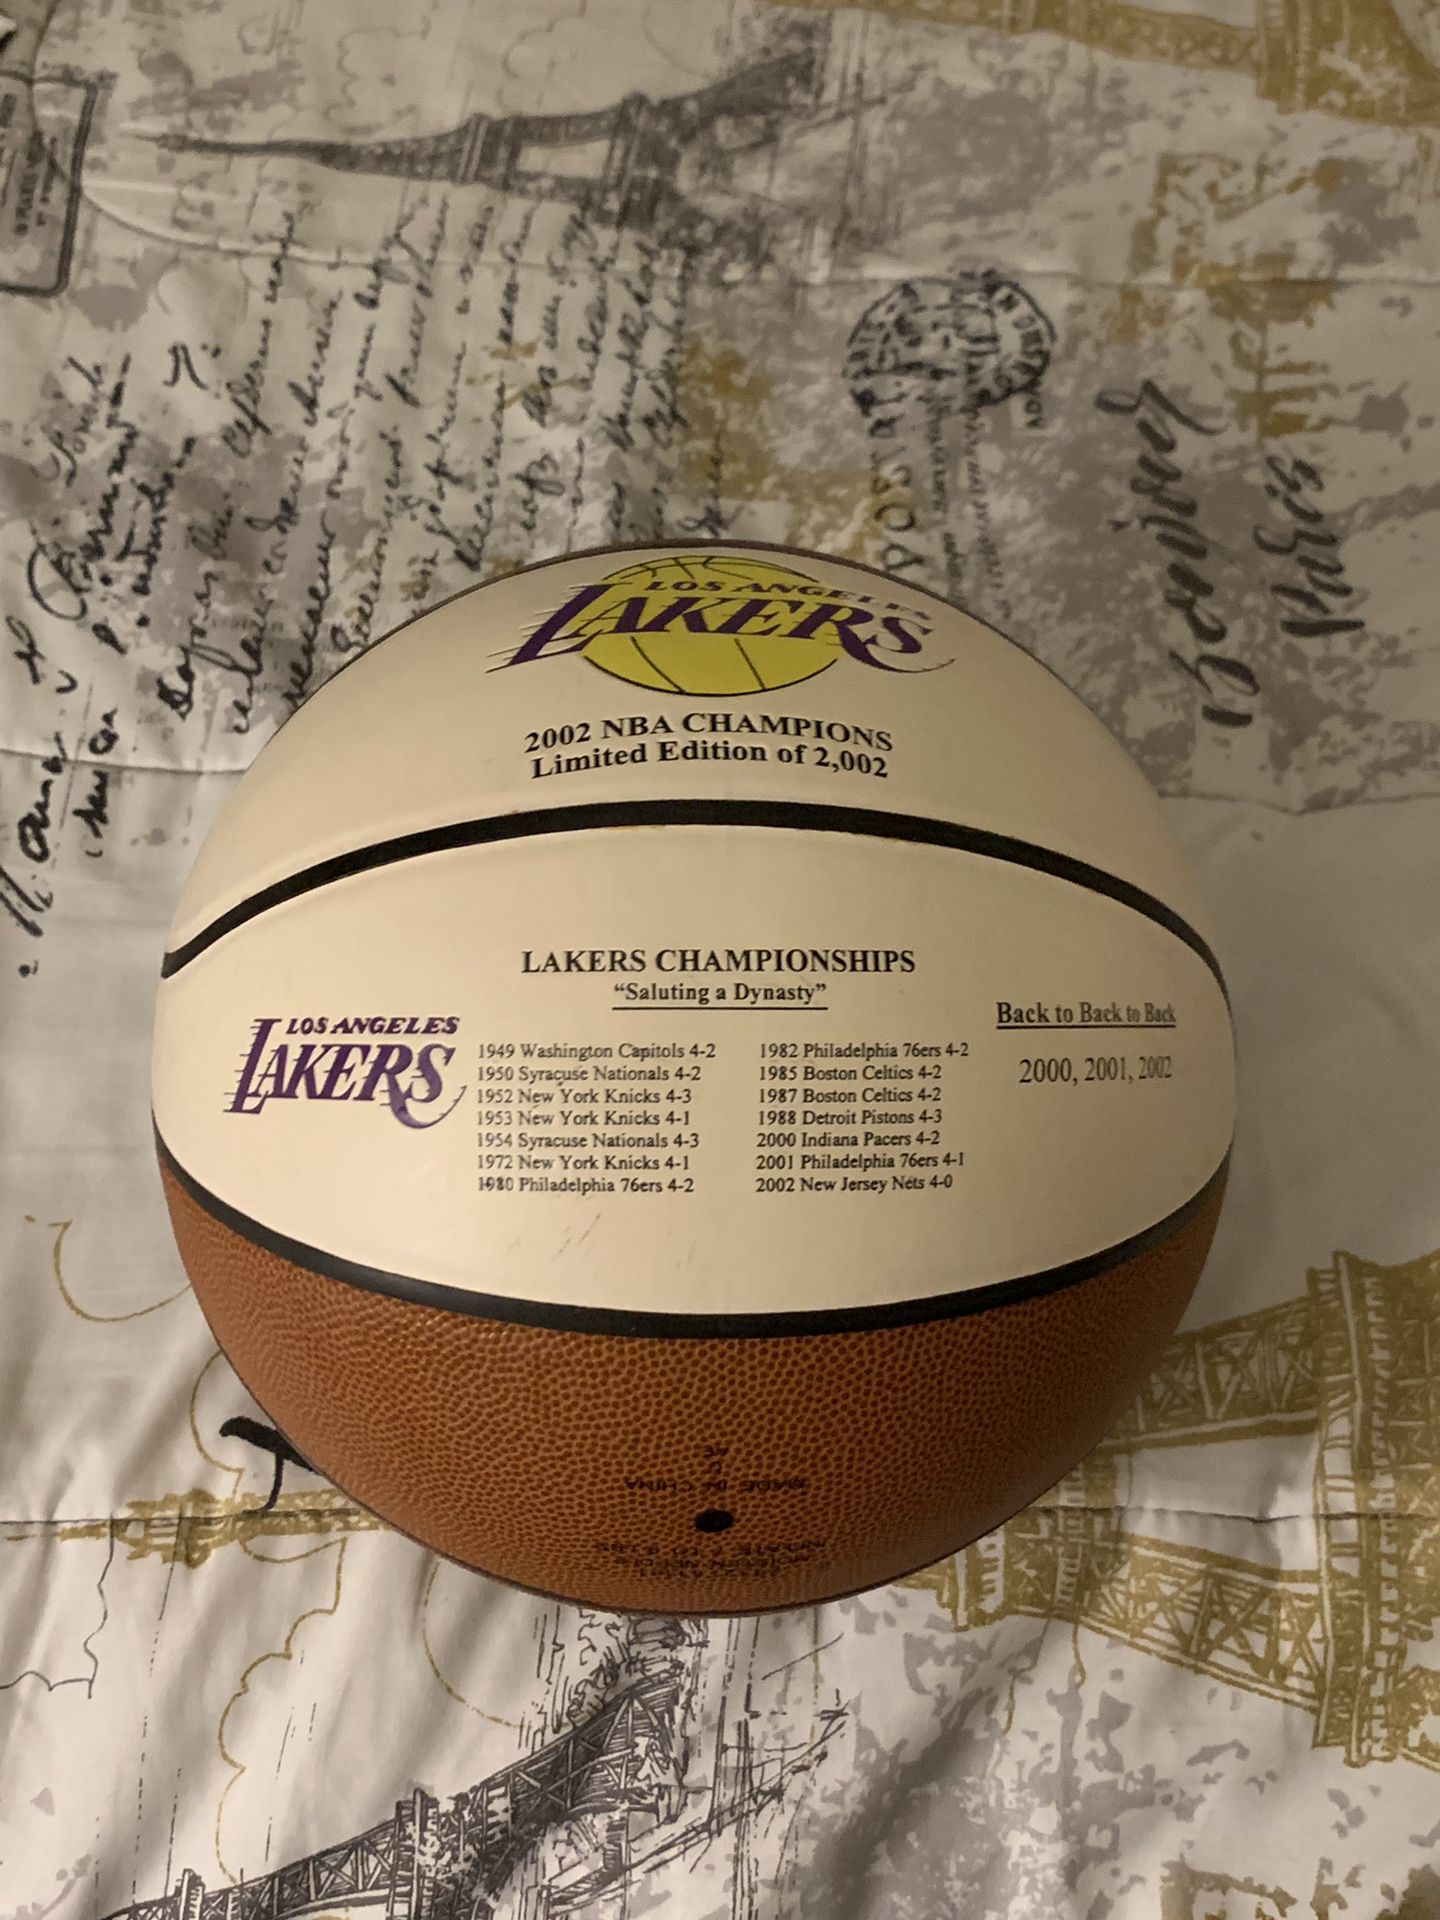 Shiny Gold Spalding Basketball The Finals Los Angeles Lakers? Rare